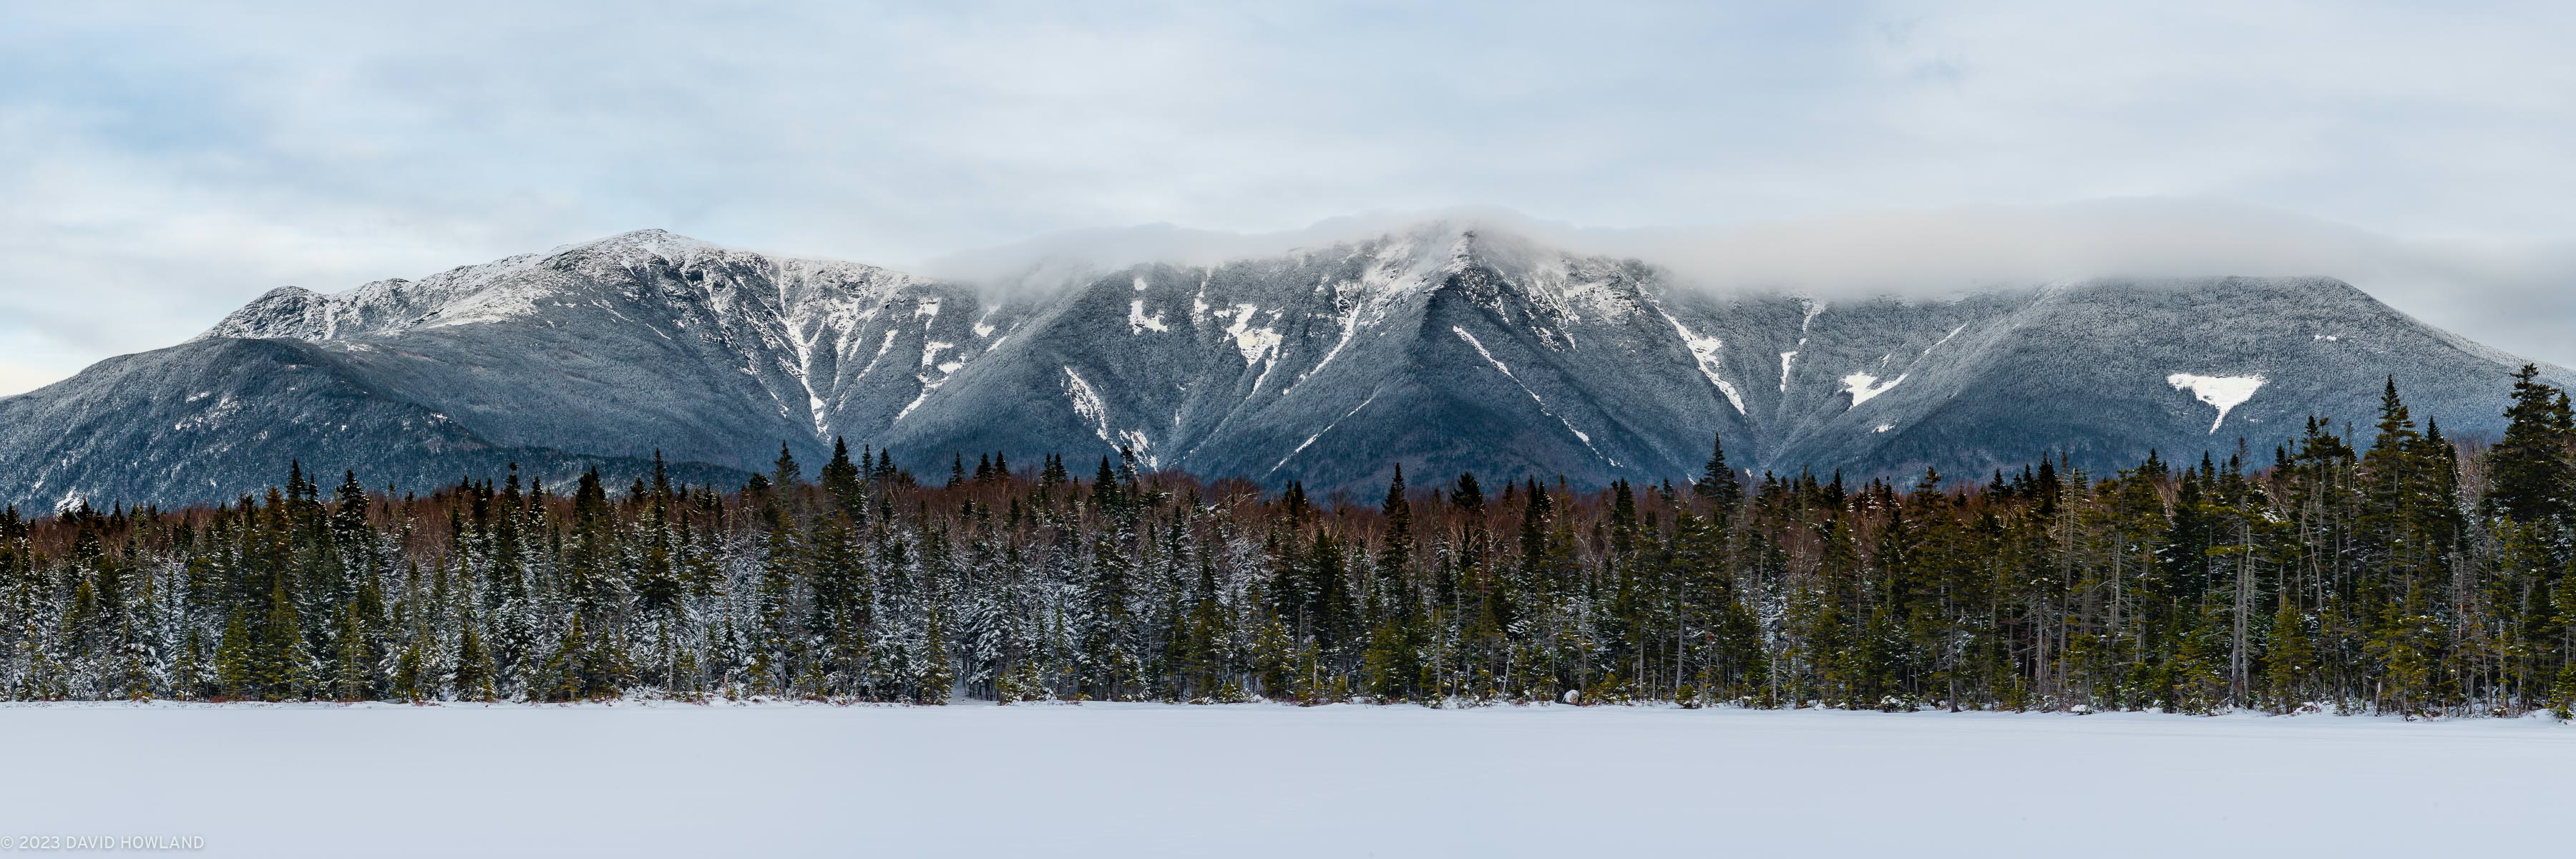 A panorama photo of the snow covered Franconia Ridge mountains above a pine forest and frozen Lonesome Lake in Franconia Notch, New Hampshire.